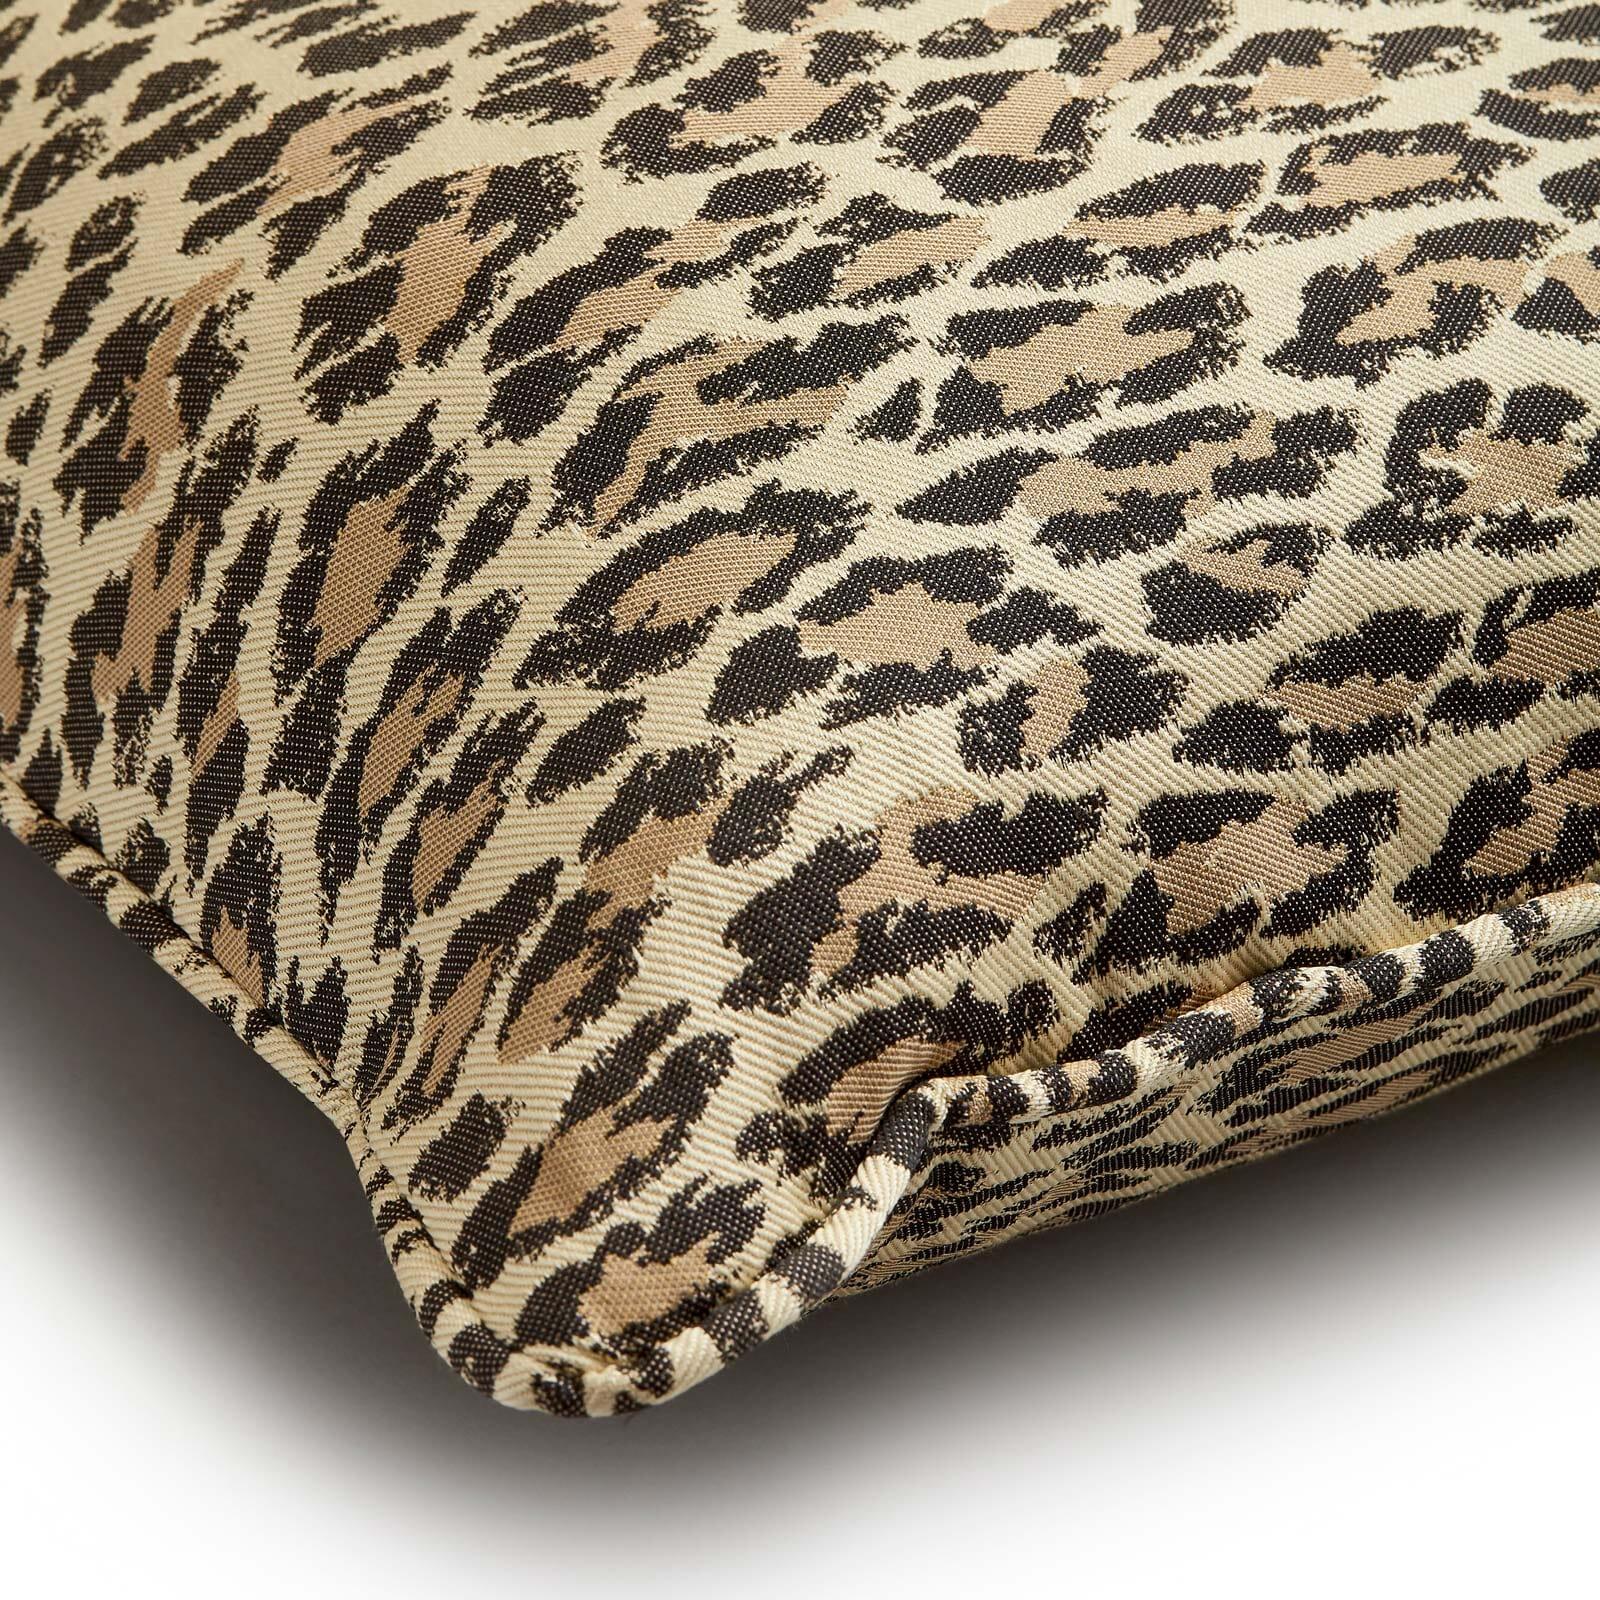 WILD CARD is House of Hackney's reworking of the classic leopard print - our new neutral. This cotton jacquard cushion will bring understated glamour to your home. Mix and match it with other prints for an eclectically cool finish.